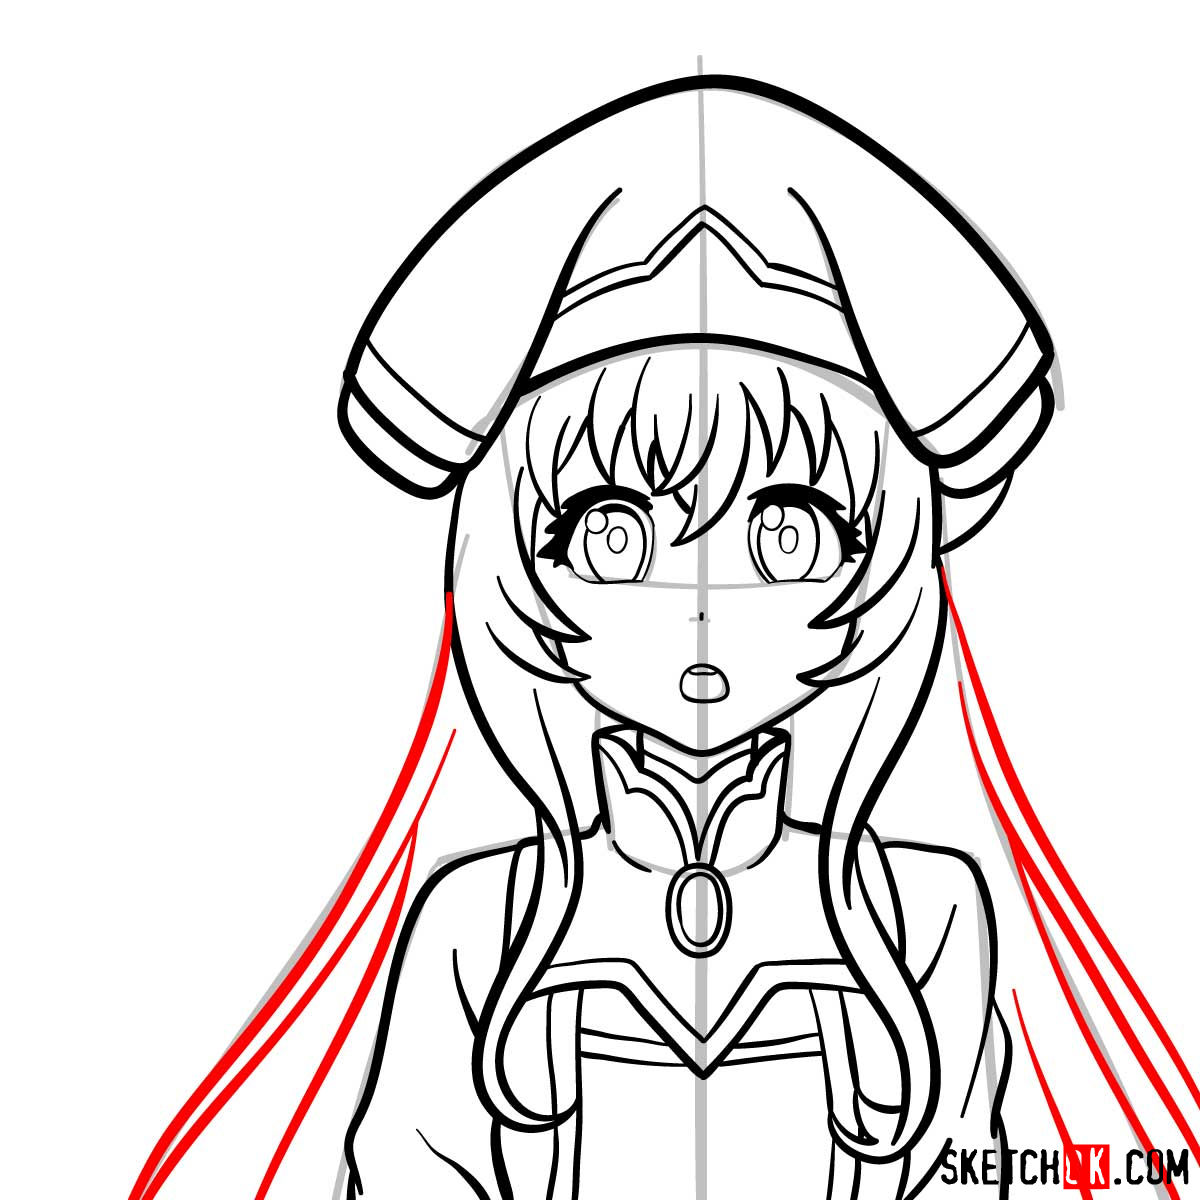 Drawing the Blond Priestess from Goblin Slayer anime in 14 steps - step 11